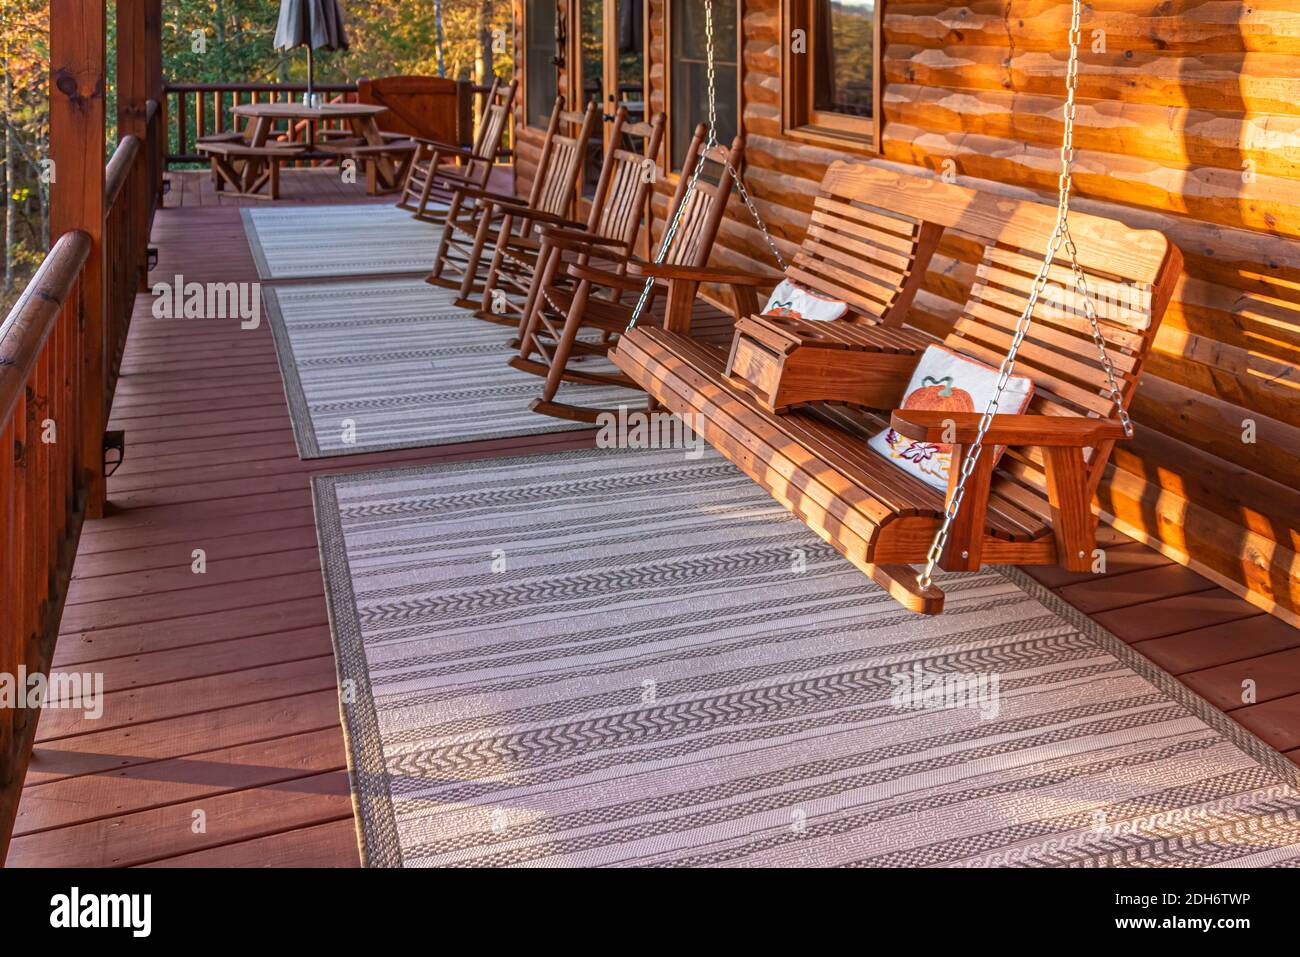 Deck rockers and porch swing provide a beautiful autumn sunrise view from this lakefront luxury log cabin in Georgia's Blue Ridge Mountains. (USA) Stock Photo